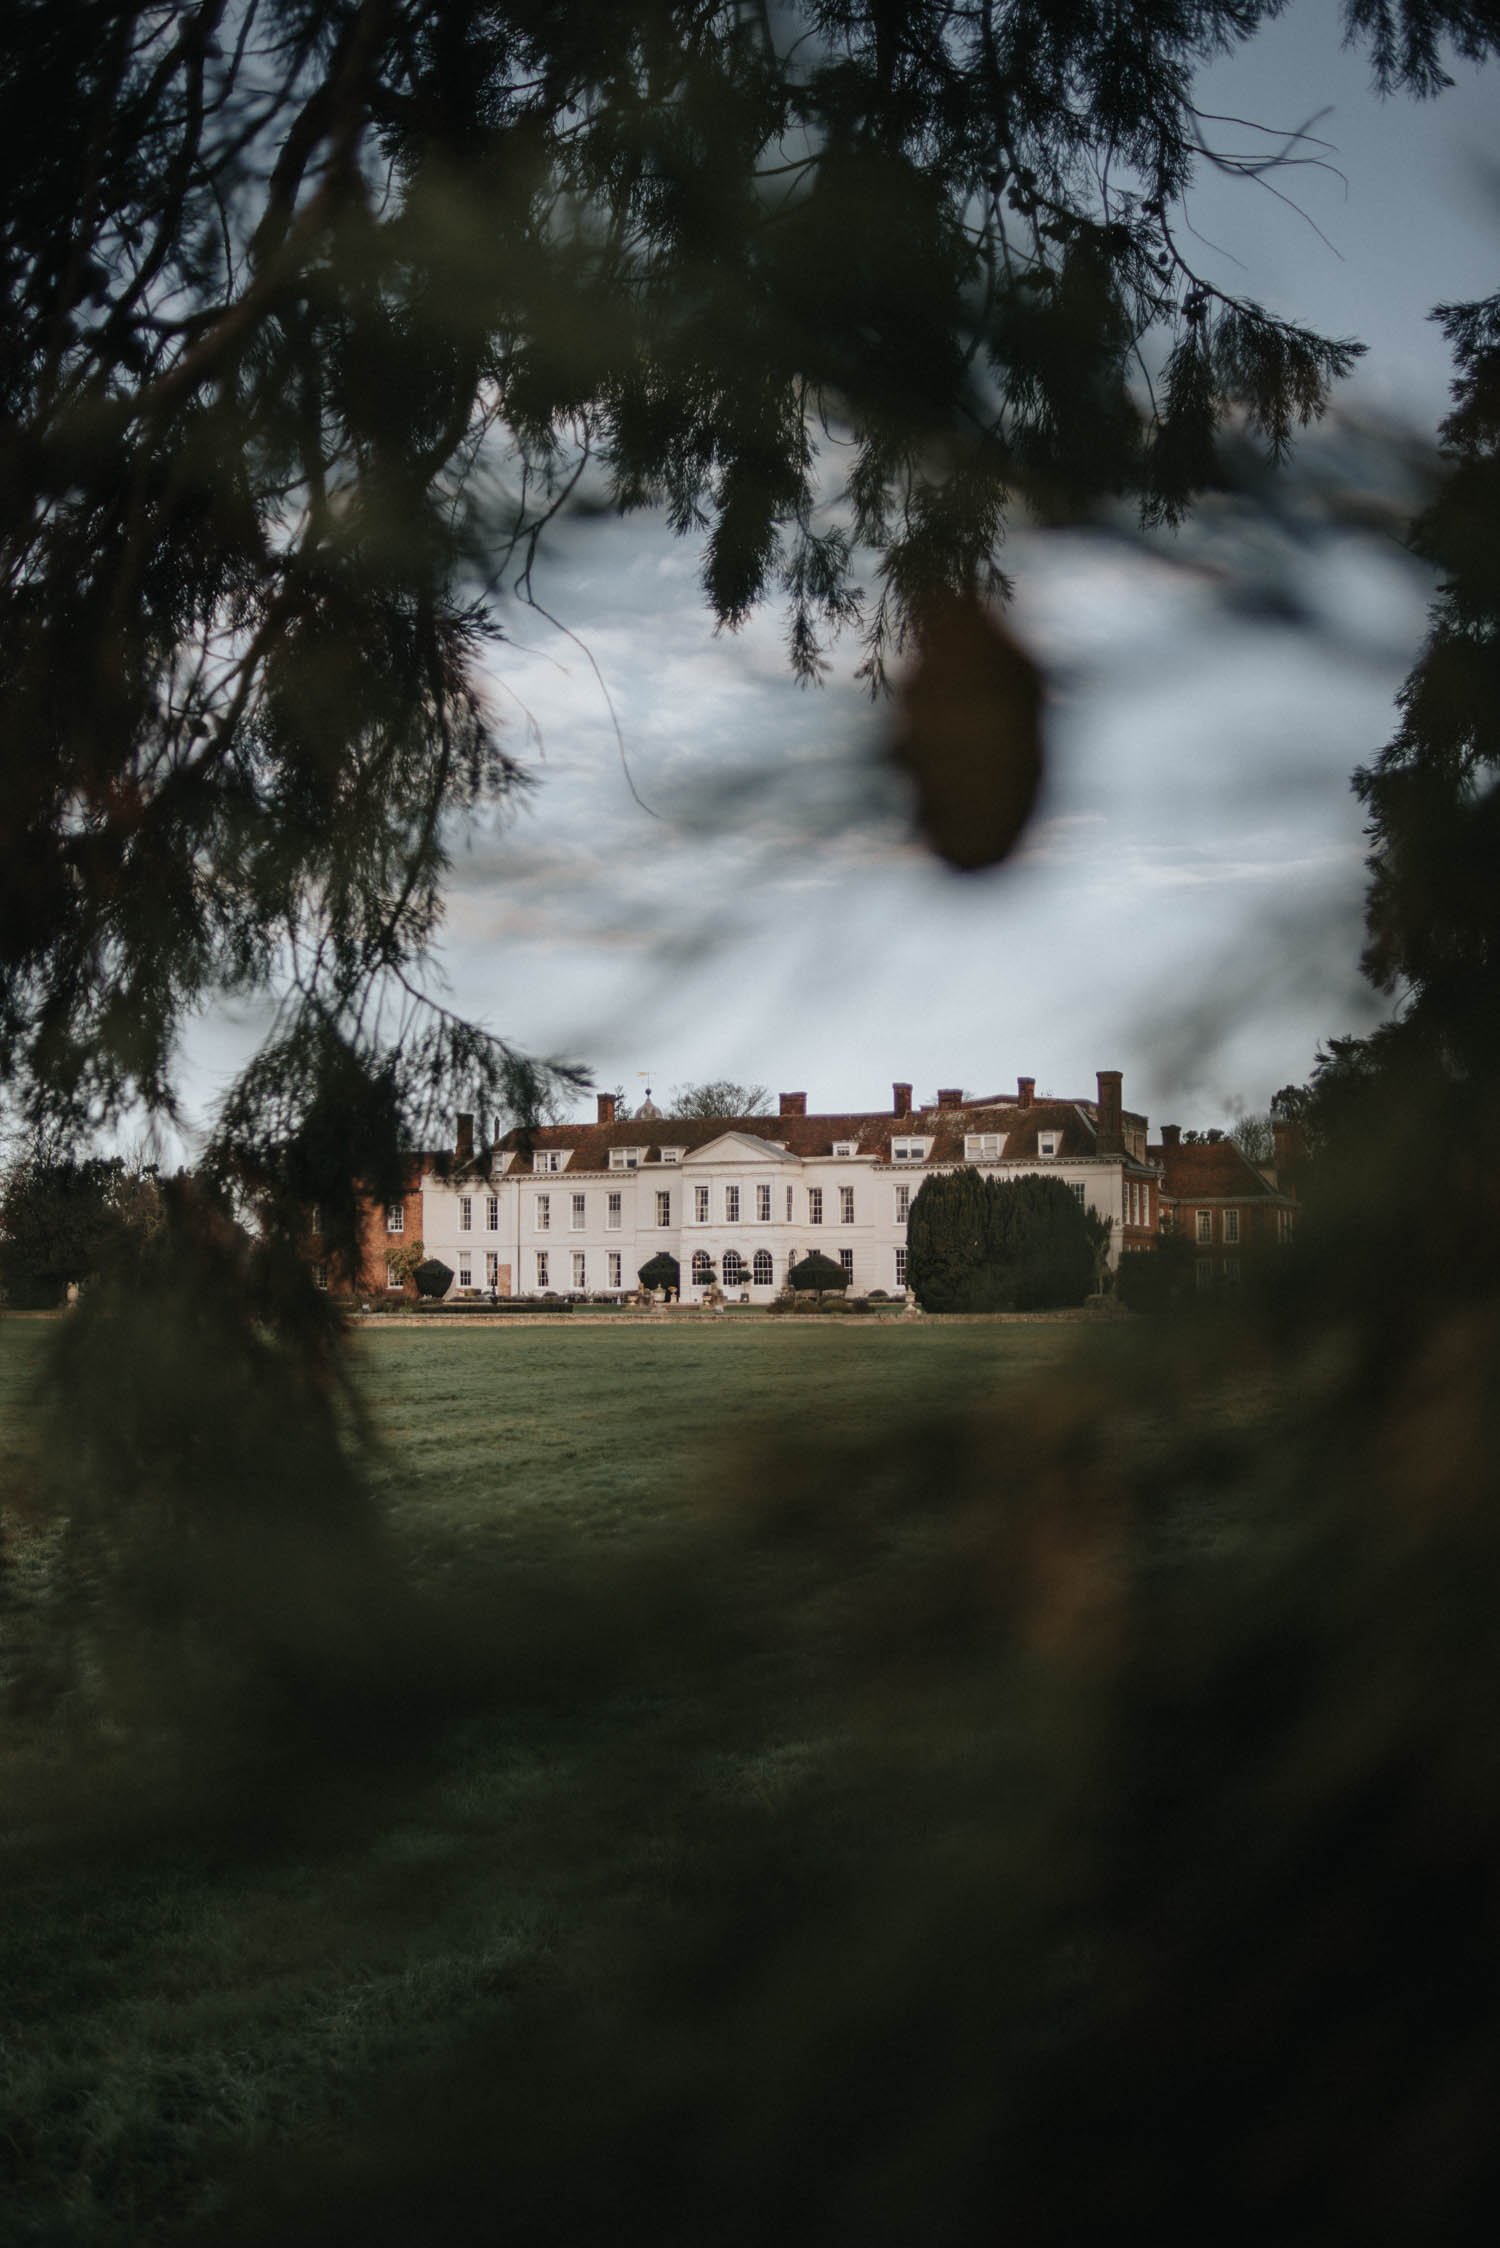 Looking at Gosfield Hall through winter trees